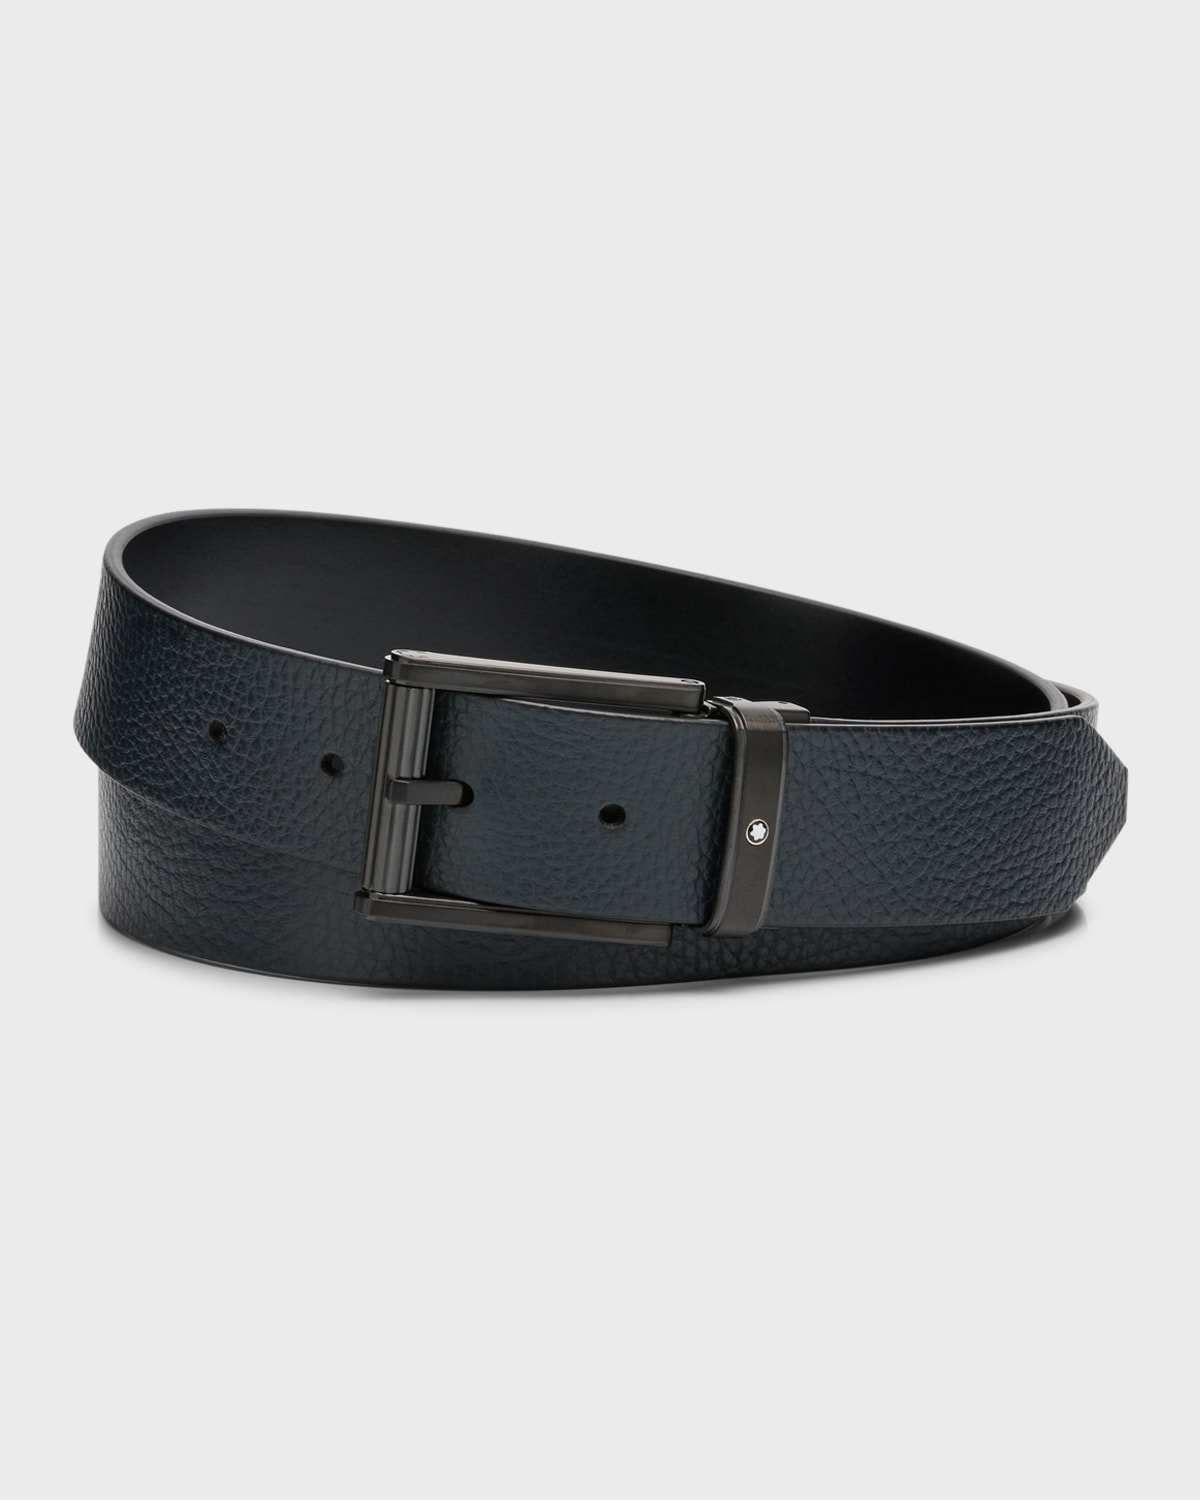 MONTBLANC MEN'S REVERSIBLE SMOOTH/GRAINED LEATHER BELT